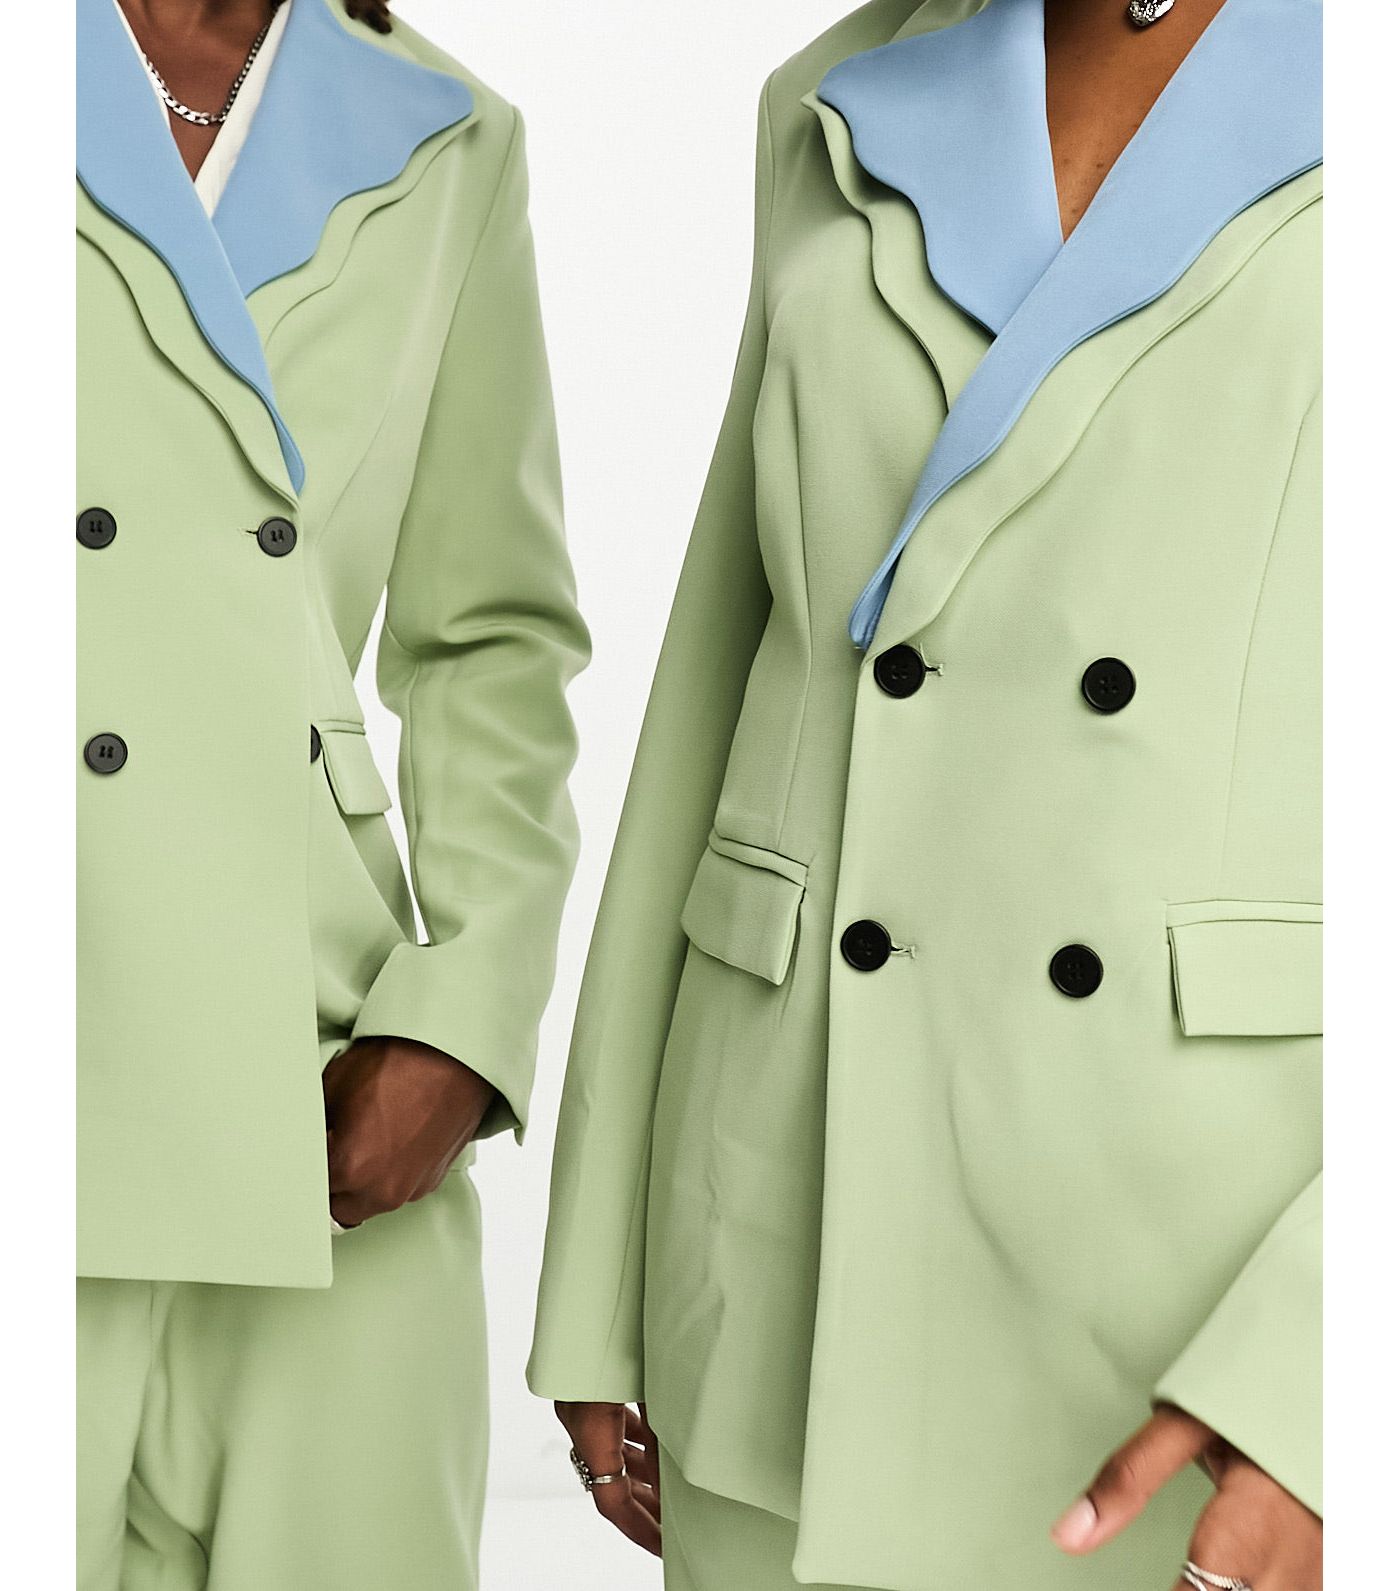 Sister Jane Unisex double breasted blazer suit co-ord in sage